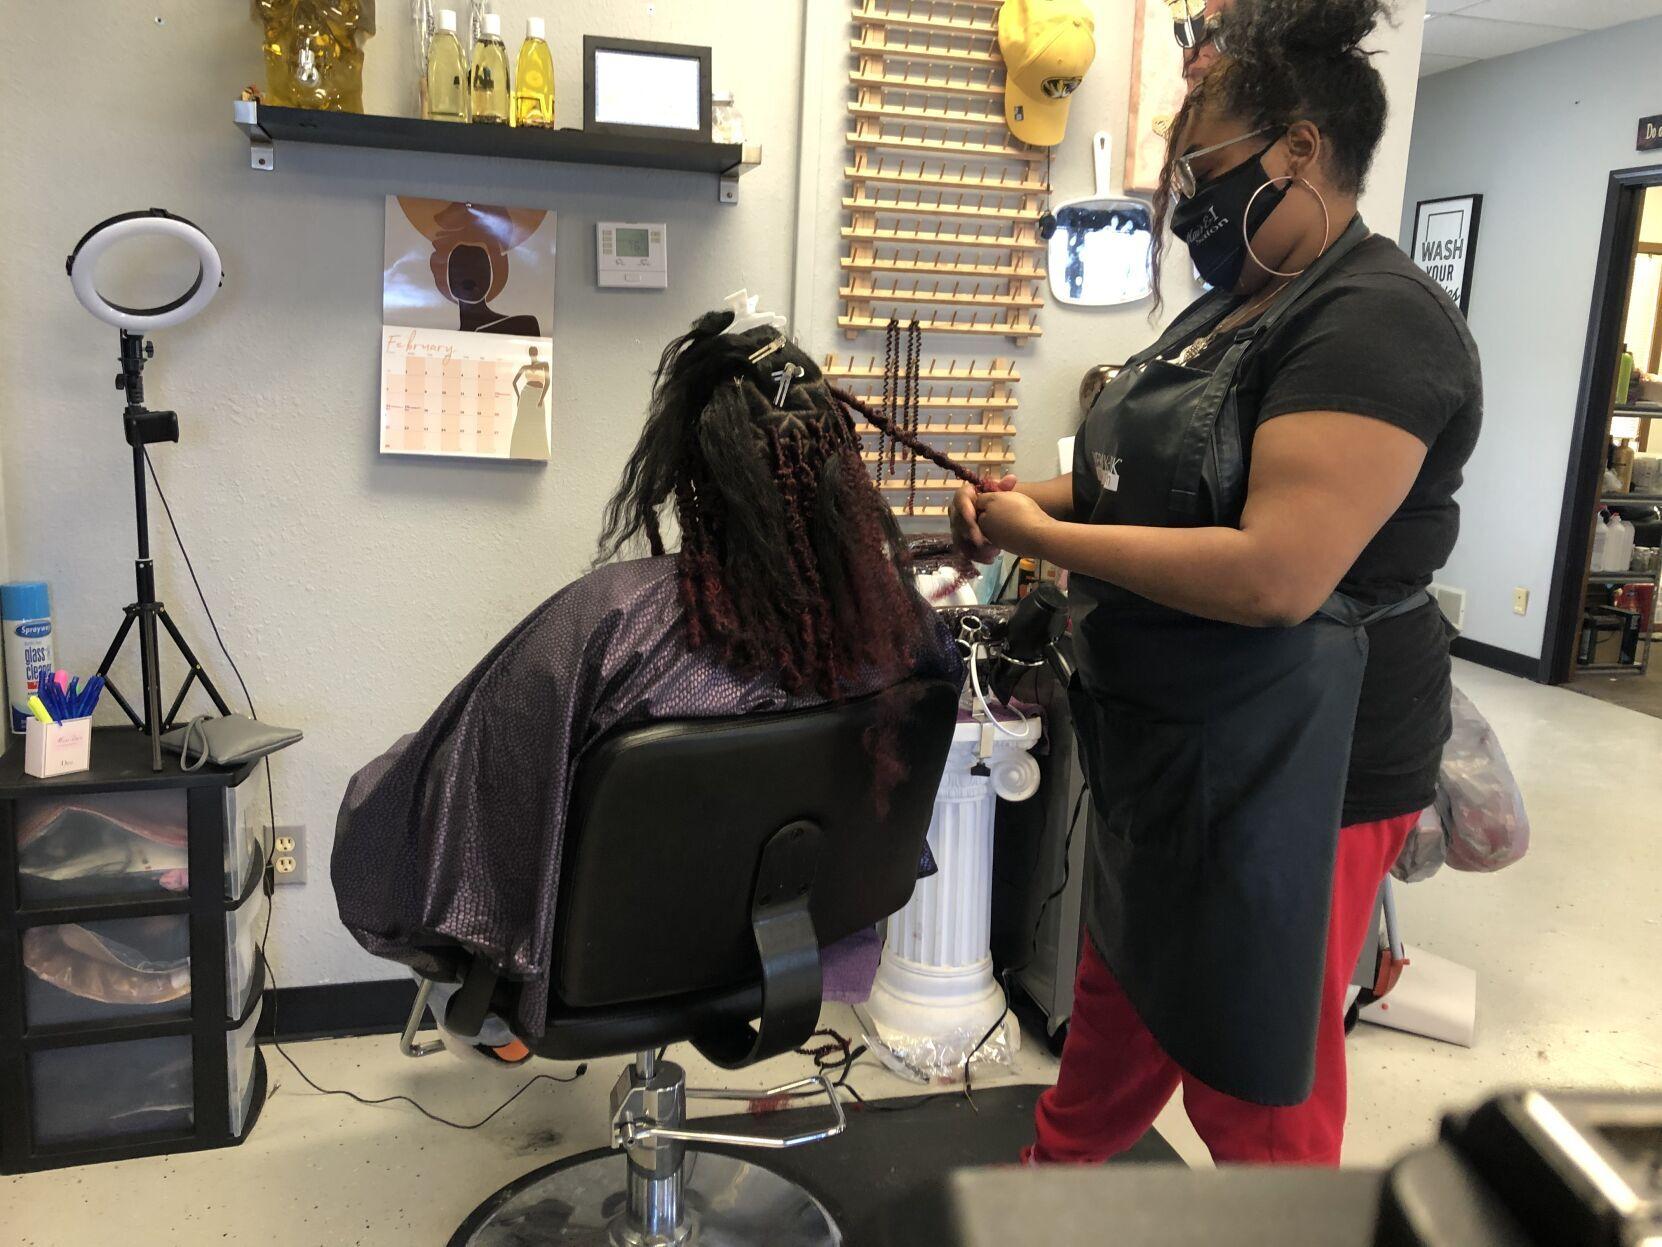 Black hair salons help to spread COVID-19 vaccine information | COVID-19 |  